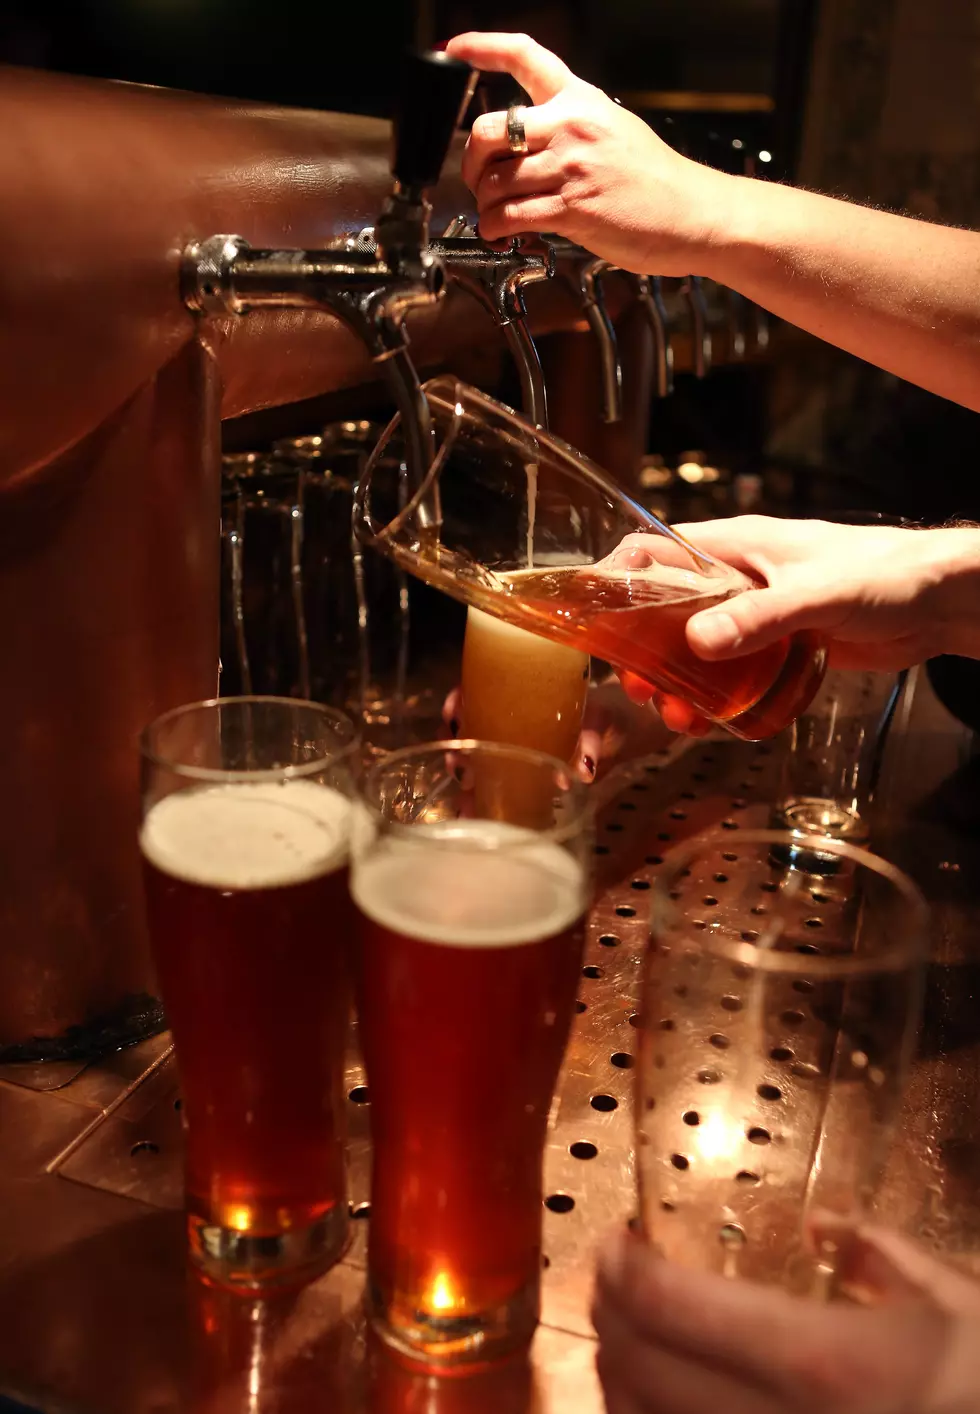 MN Bars, Restaurants: Follow COVID-19 Rules, ‘Our Survival Depends On It’